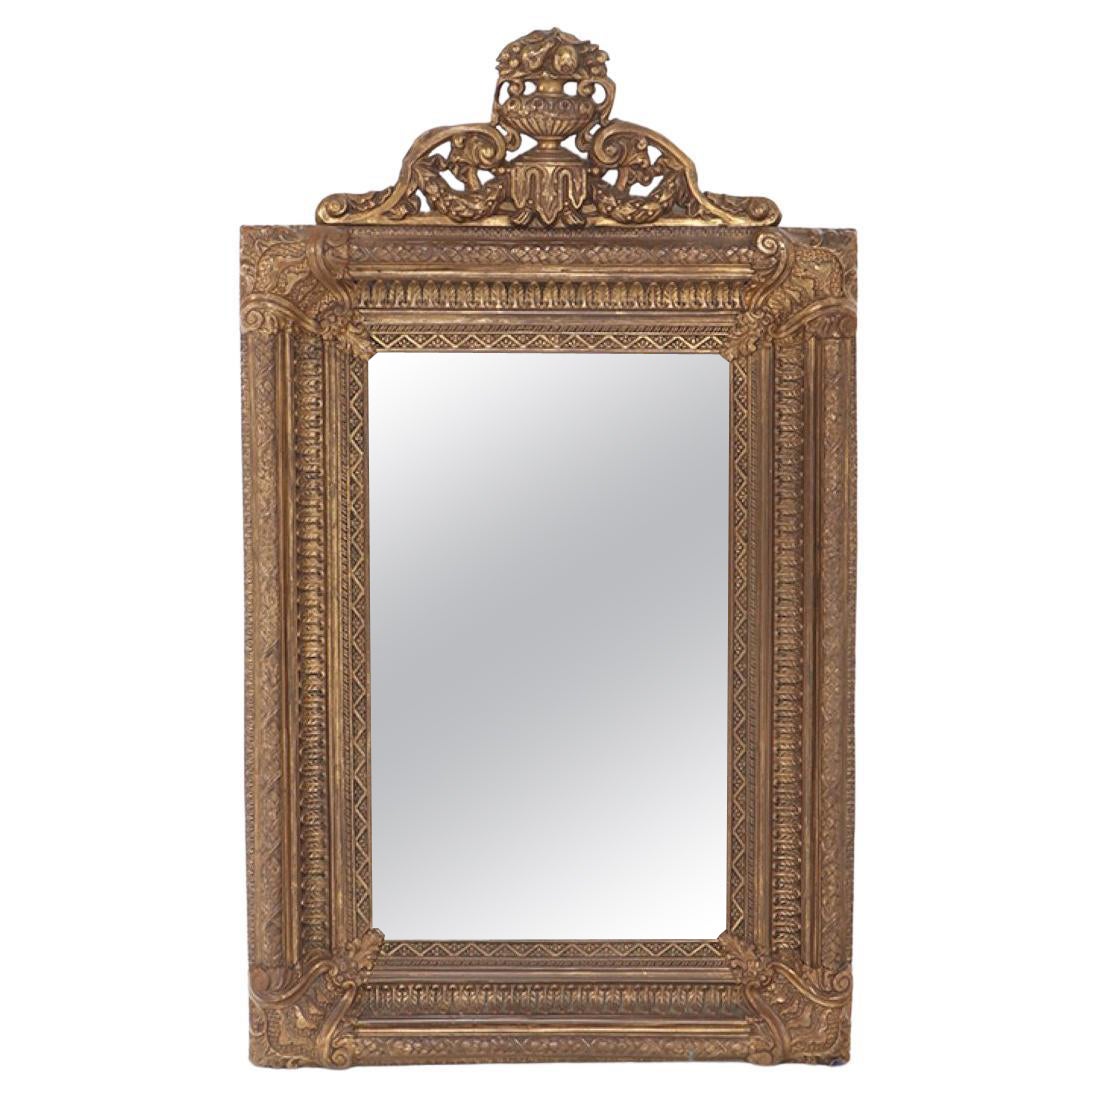 A Dutch style brass repouse mirror circa 1880. Top crest is removeable For Sale